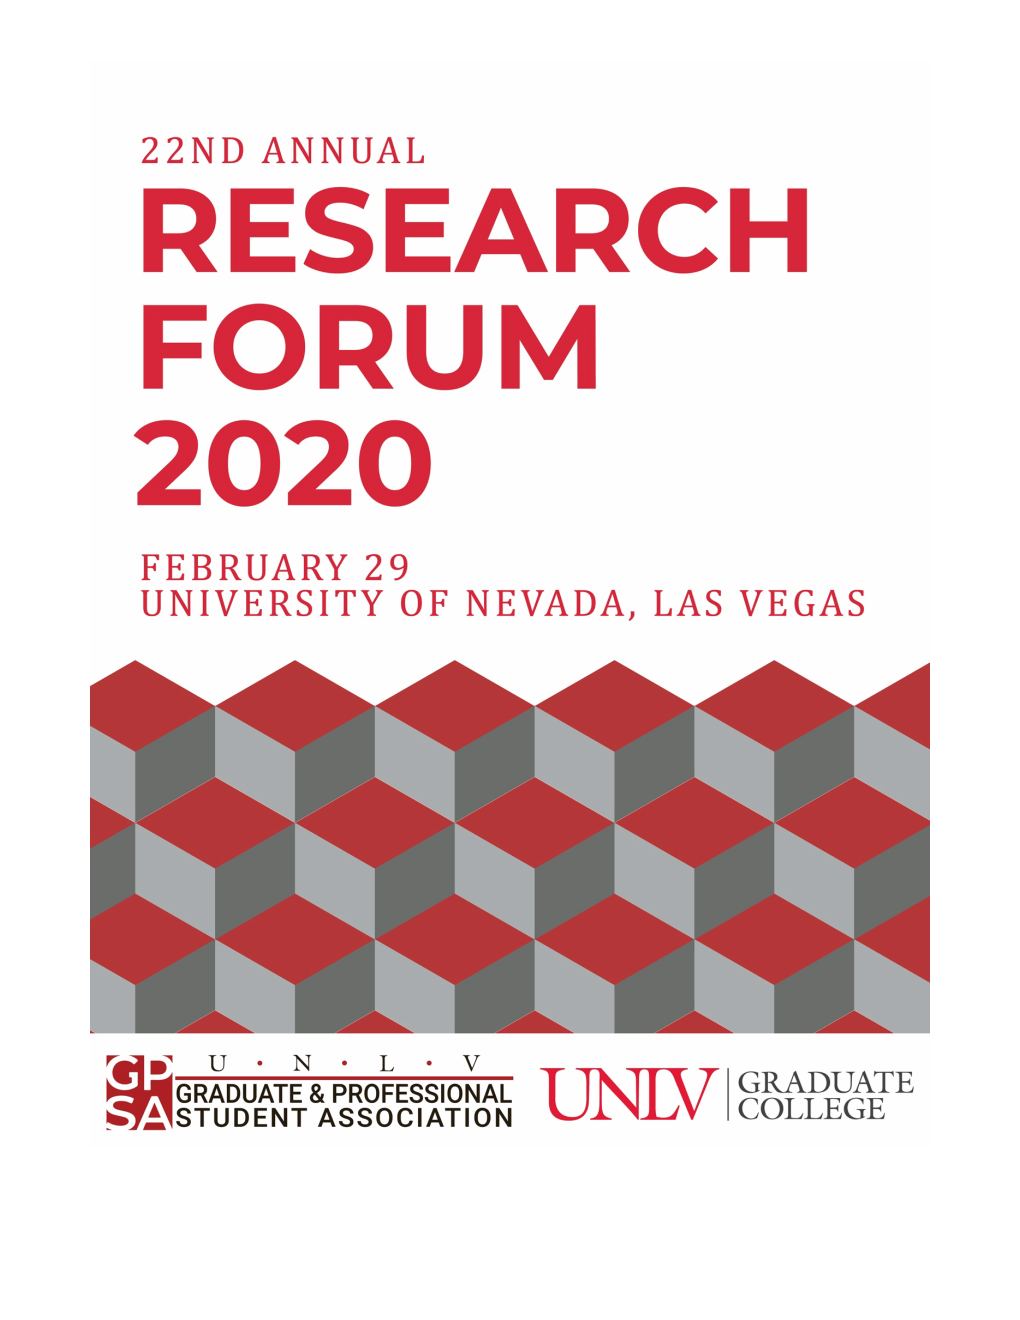 The Graduate & Professional Student Research Forum Is